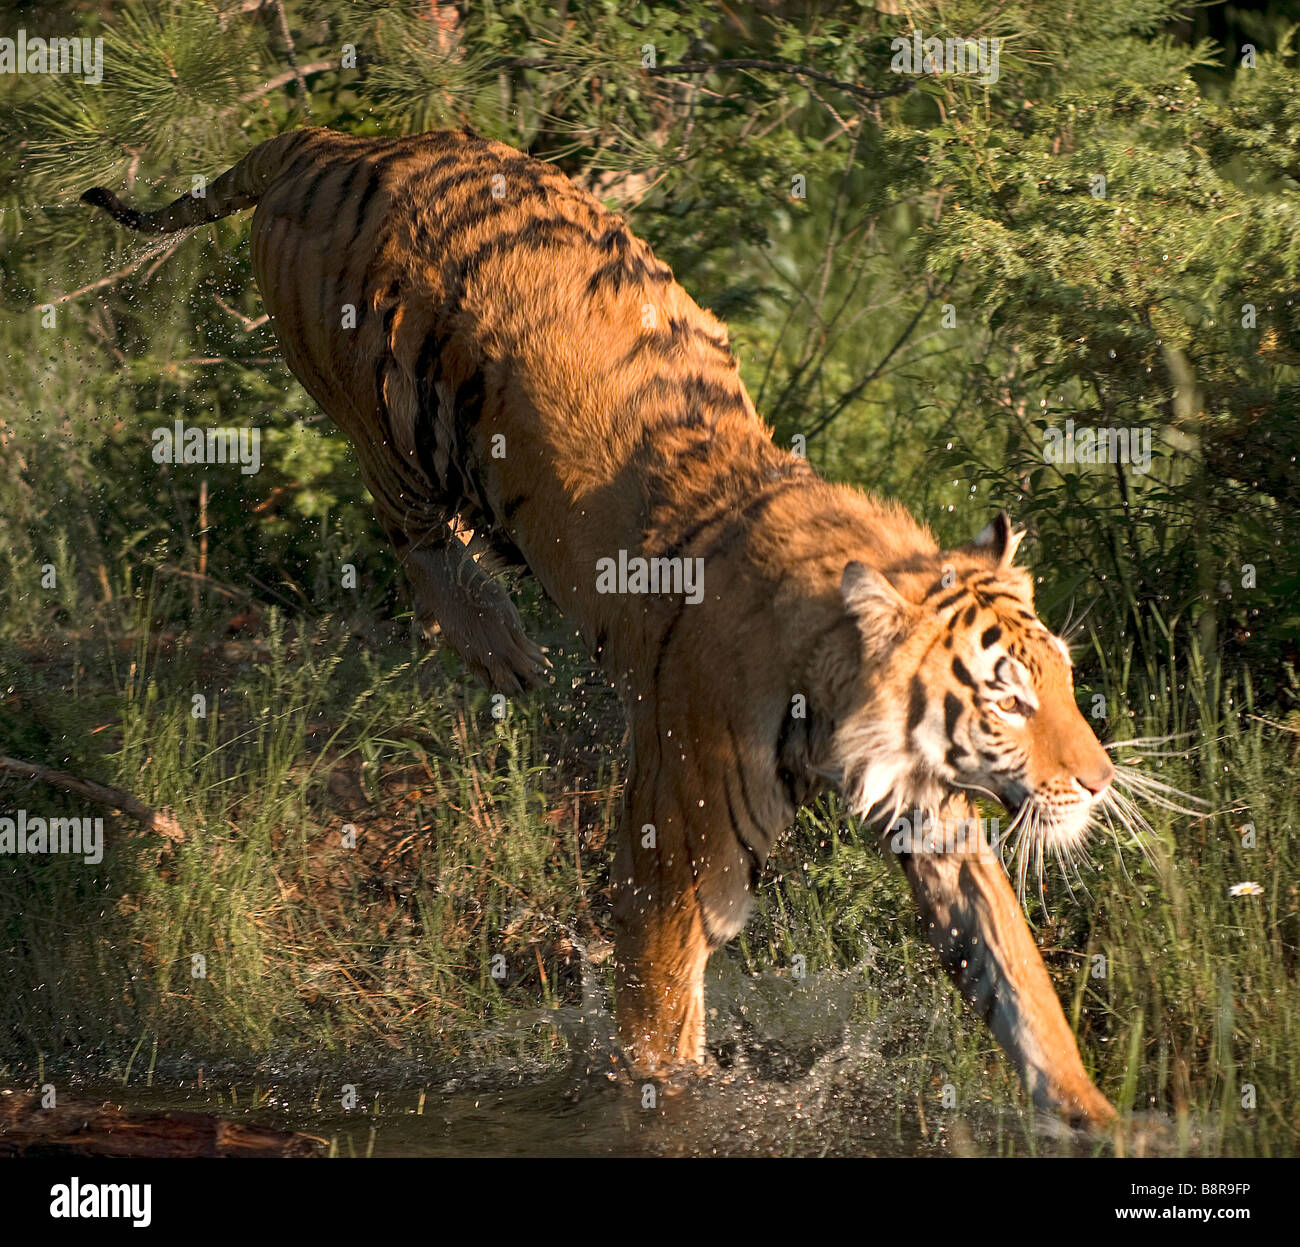 Siberian tiger playfully jumping into the water of a shallow pond Stock Photo